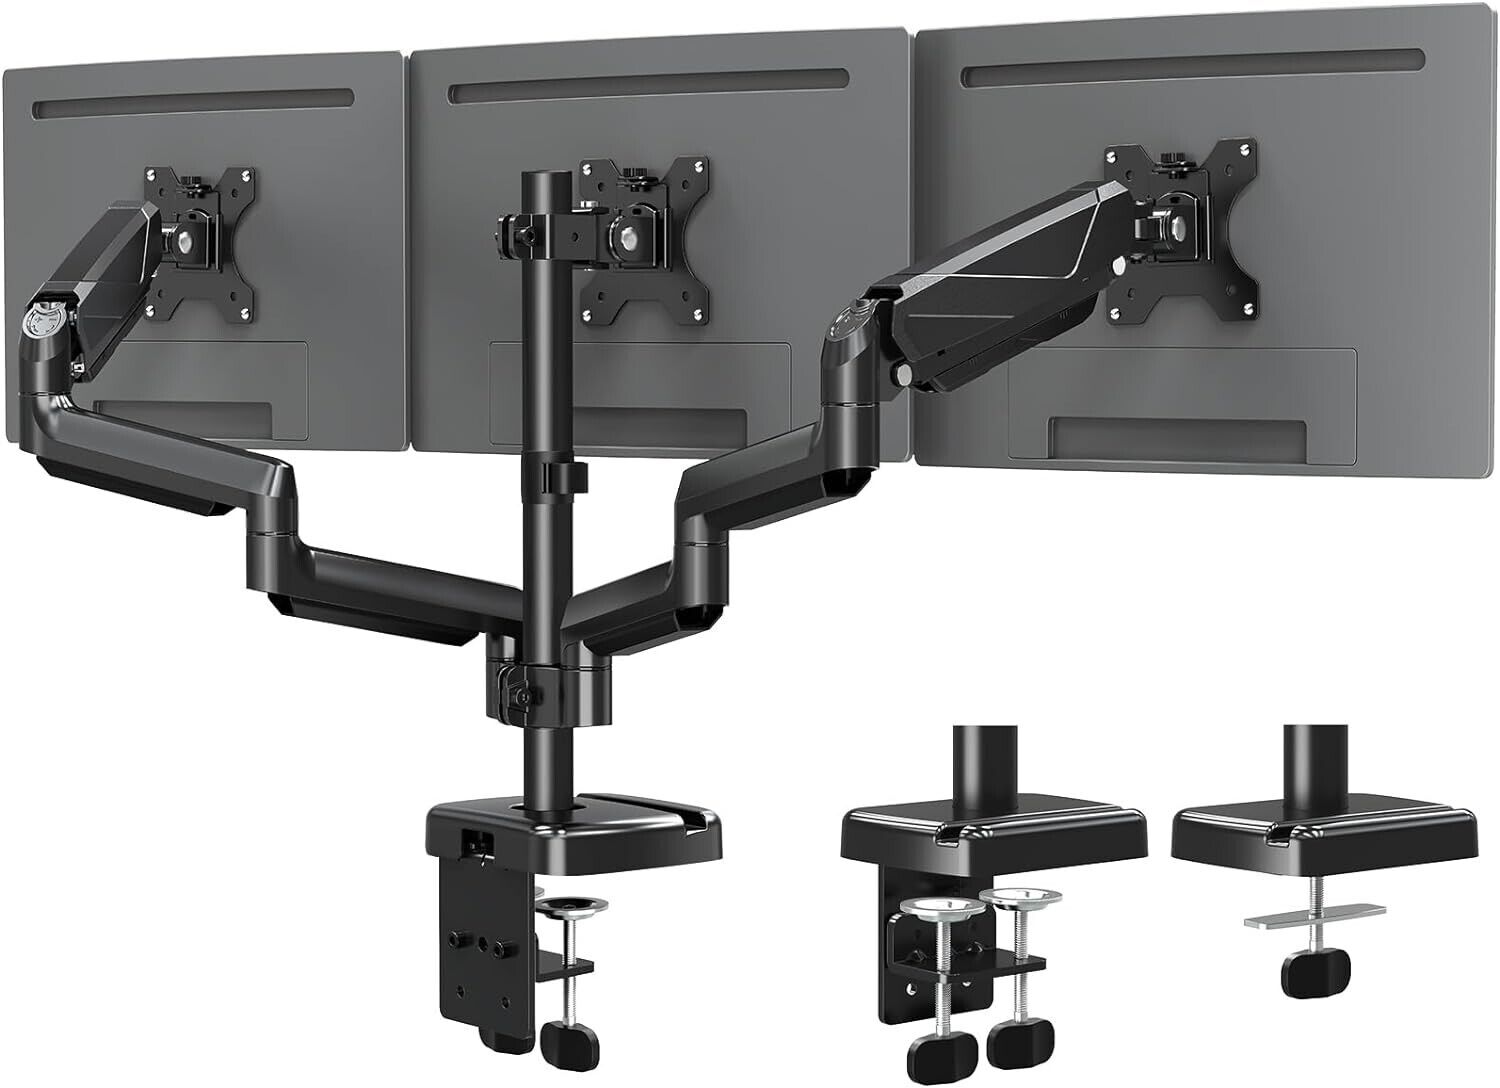 MOUNTUP Triple Monitor Mount, 3 Monitor Stand Desk Arm for Max 32 Inch MU8004